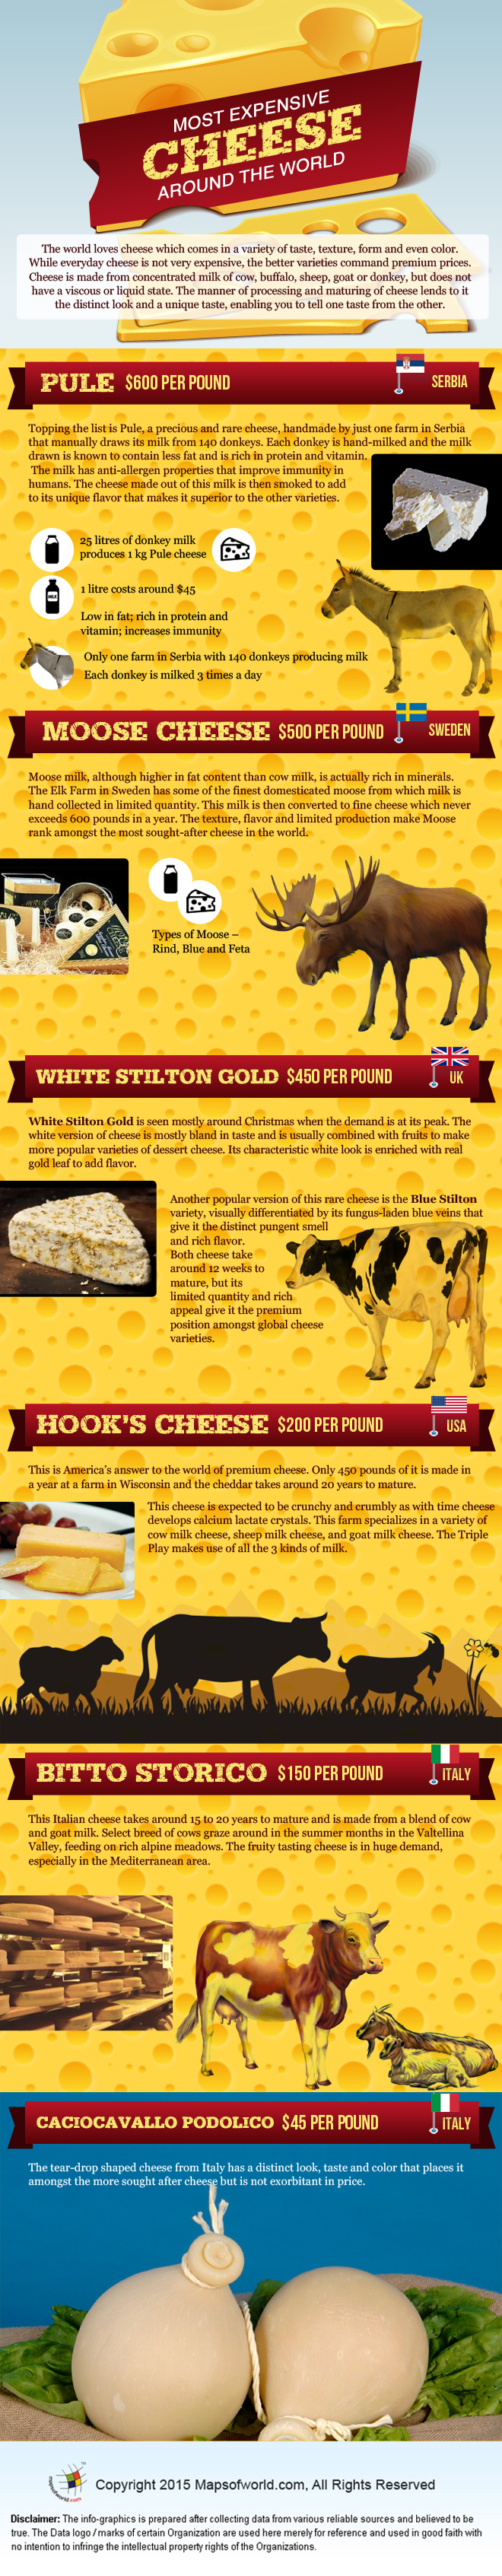 Infographics on Most Expensive Cheese around the World